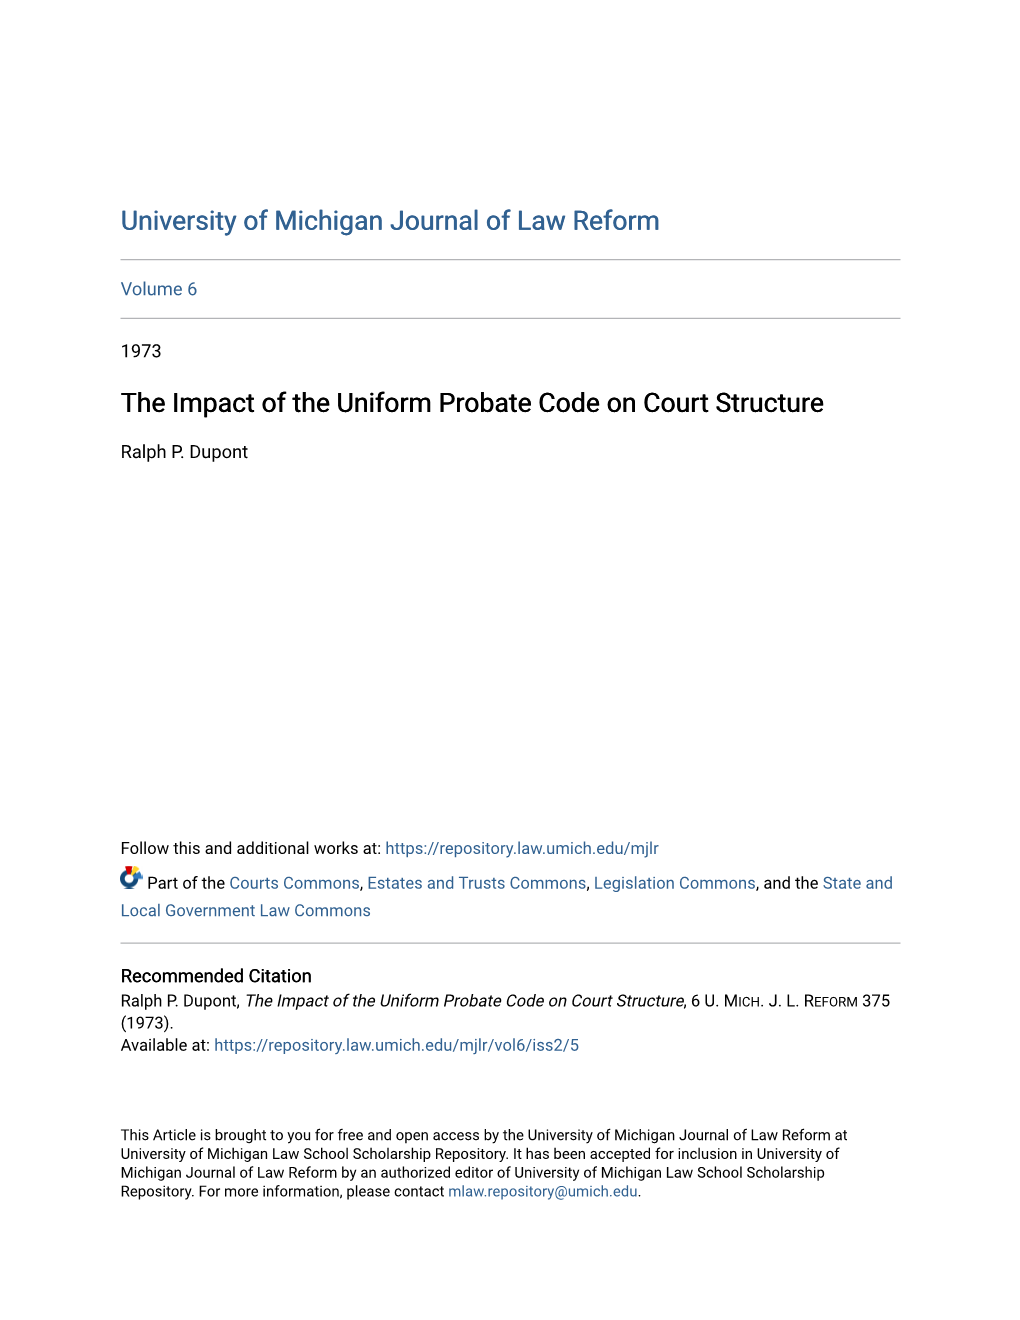 The Impact of the Uniform Probate Code on Court Structure